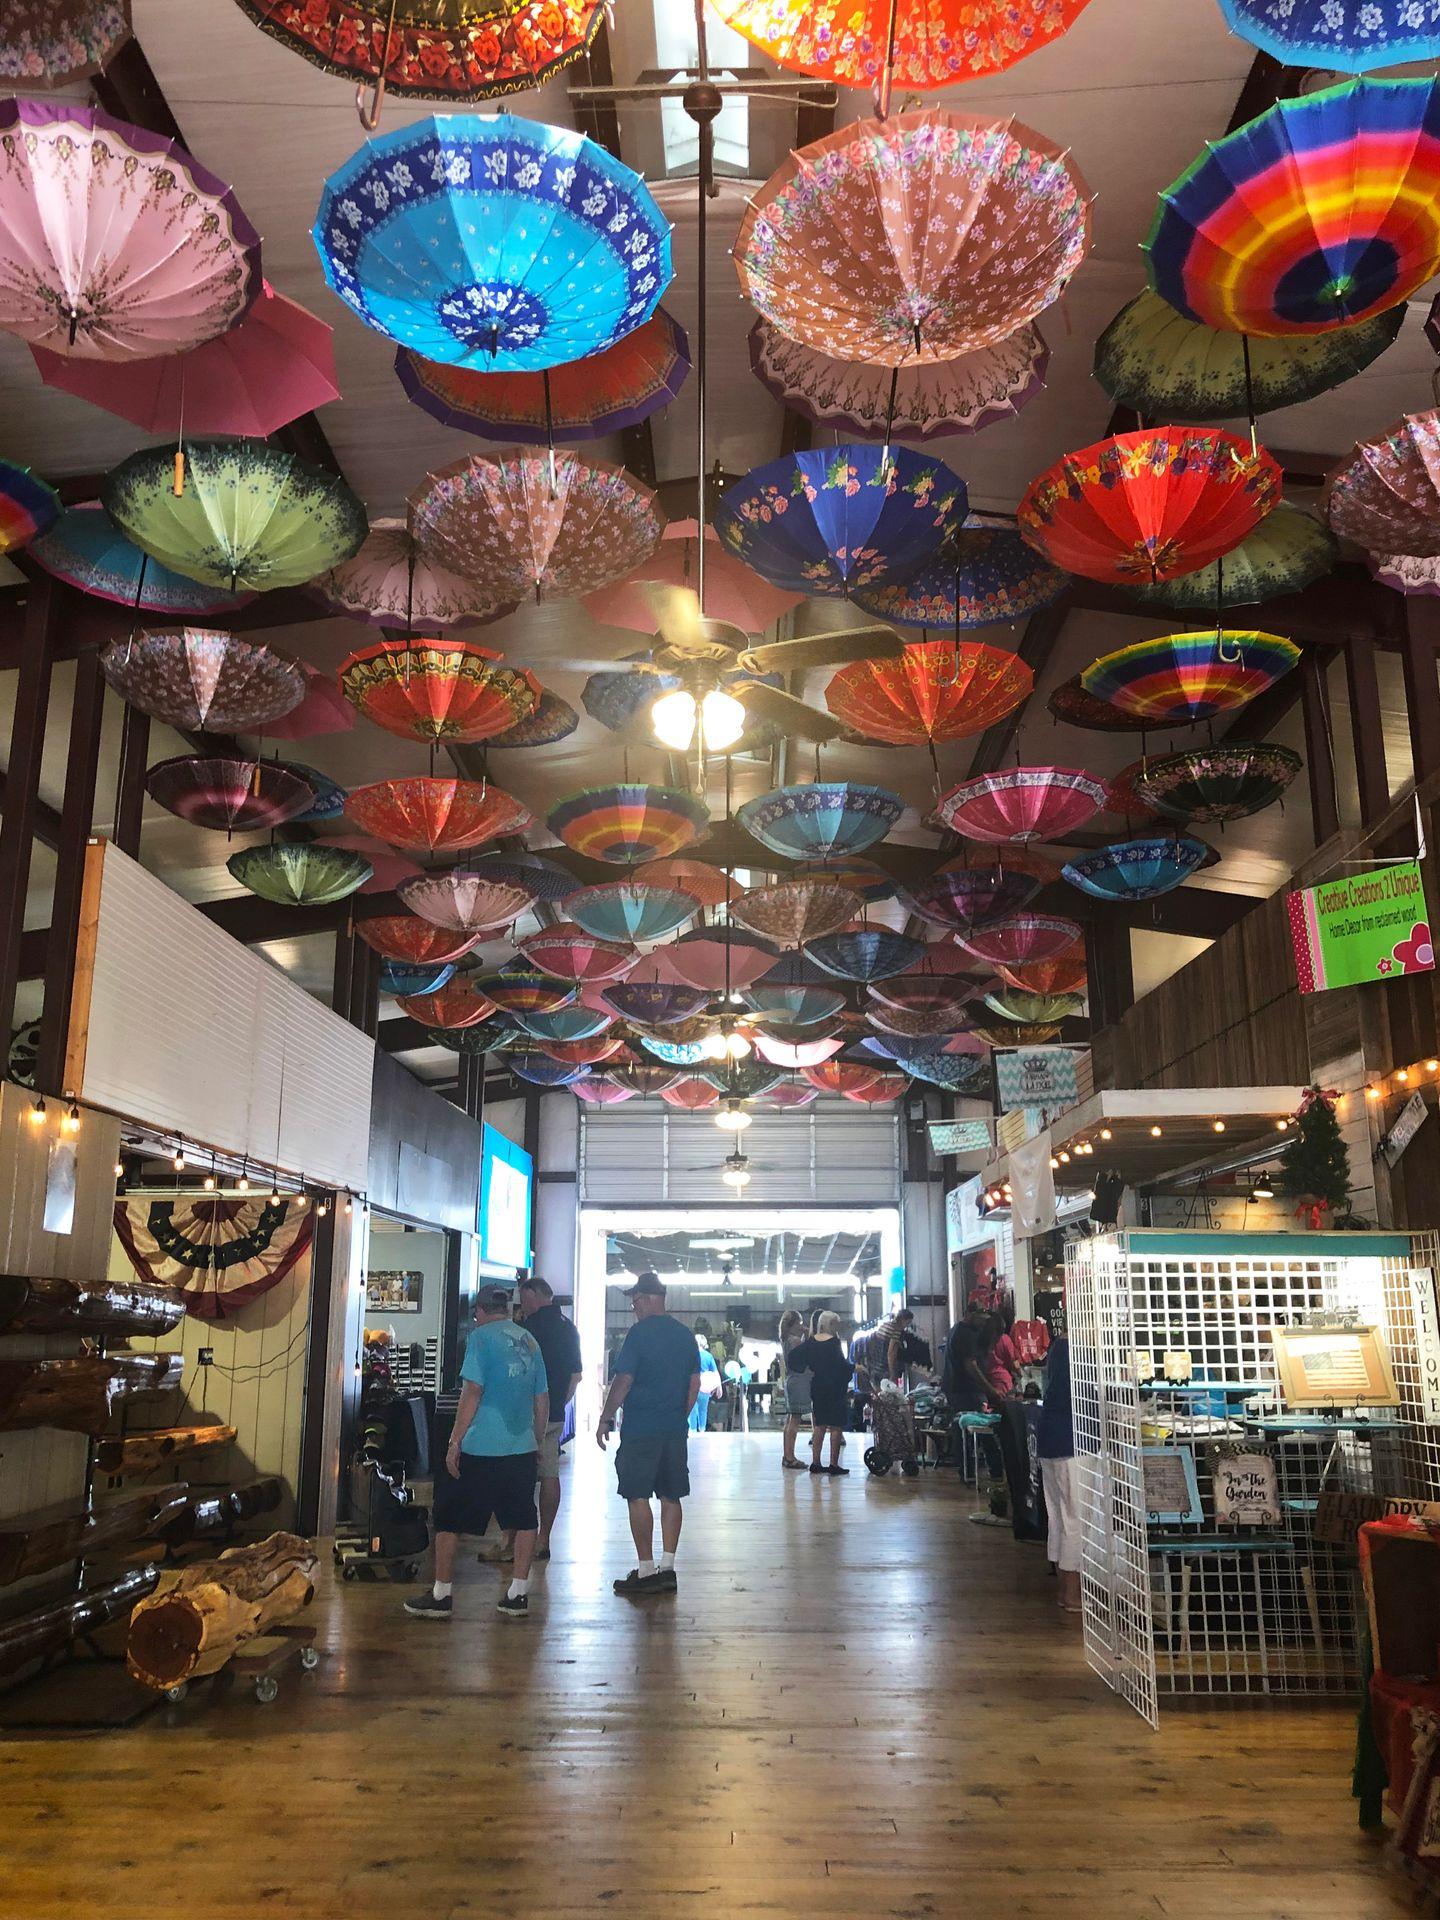 A market hall room with colorful umbrellas hanging from the ceiling.